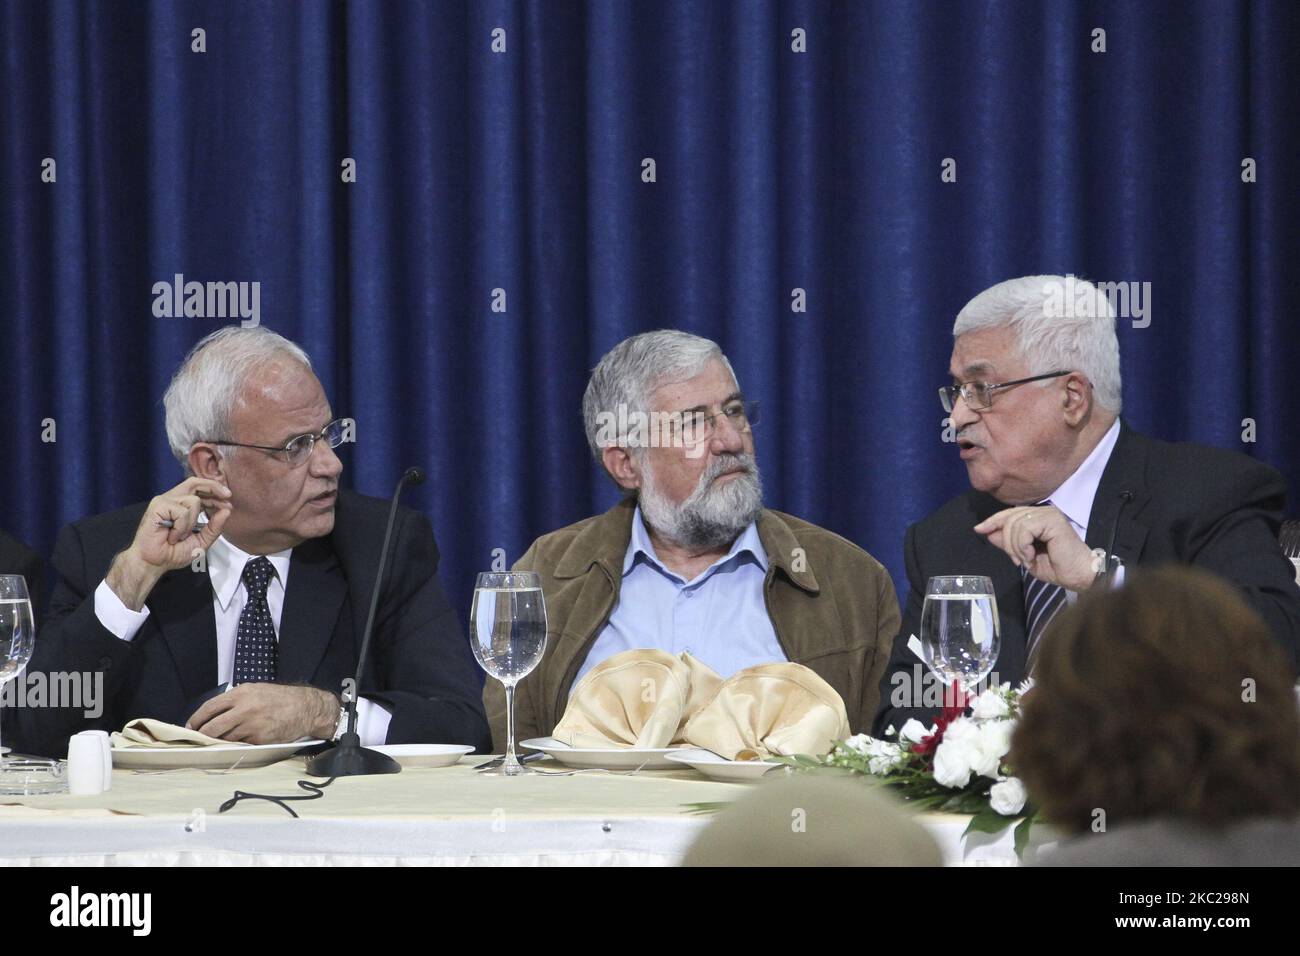 Senior Palestinian politician and diplomat and top PLO official Saeb Erekat (left) with Israeli politician Amram Mitzna (center) and Palestinian President Mahmoud Abbas (right) in the West Bank city of Ramallah on 19 December, 2010. Senior Palestinian politician and diplomat and top PLO official Saeb Erekat is in critical condition with COVID-19 after he was hospitalized at Israel's Hadassah Medical Center in Jerusalem on Sunday, 18 October, 2020. (Photo by Mati Milstein/NurPhoto) Stock Photo